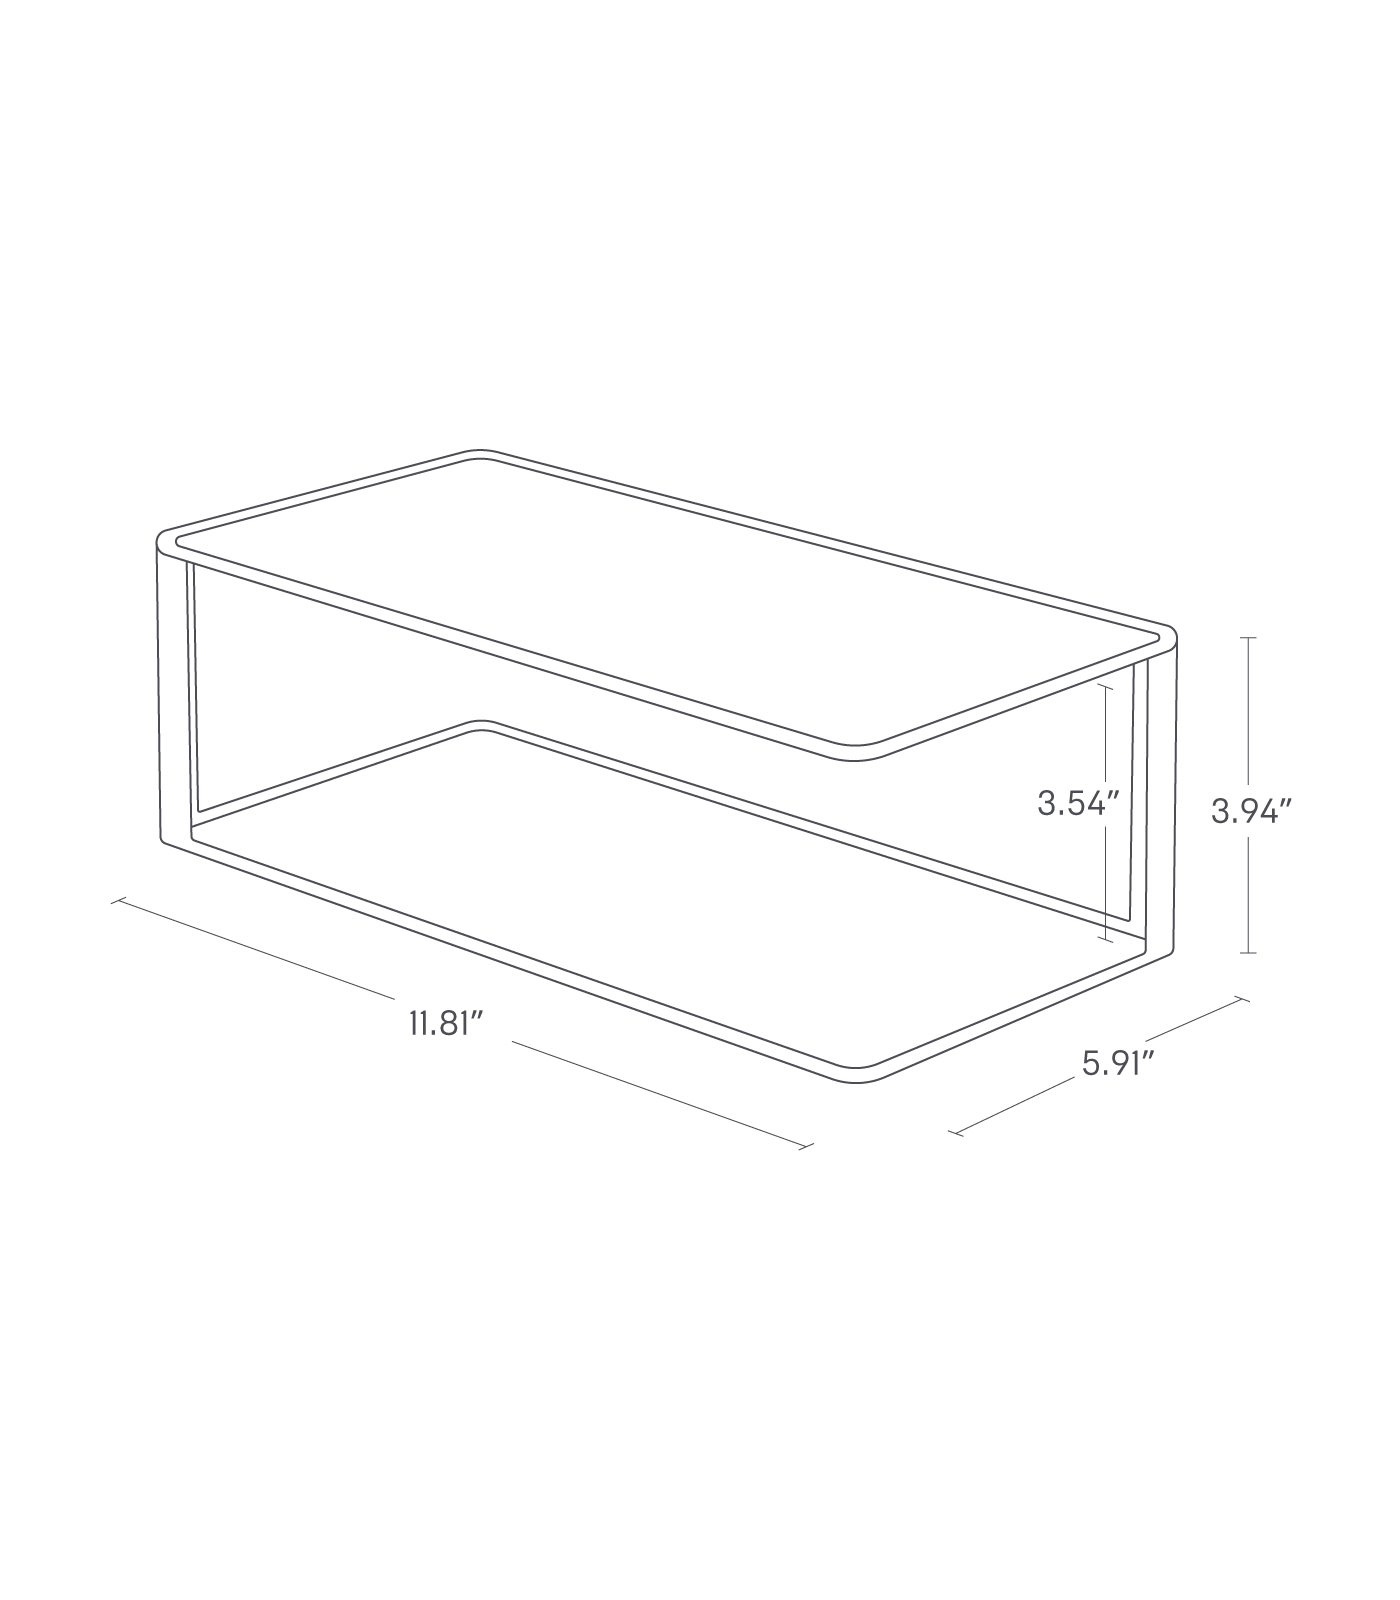 Dimension Image for Two-Tier Cabinet Organizer on a white background showing a total height of 3.94